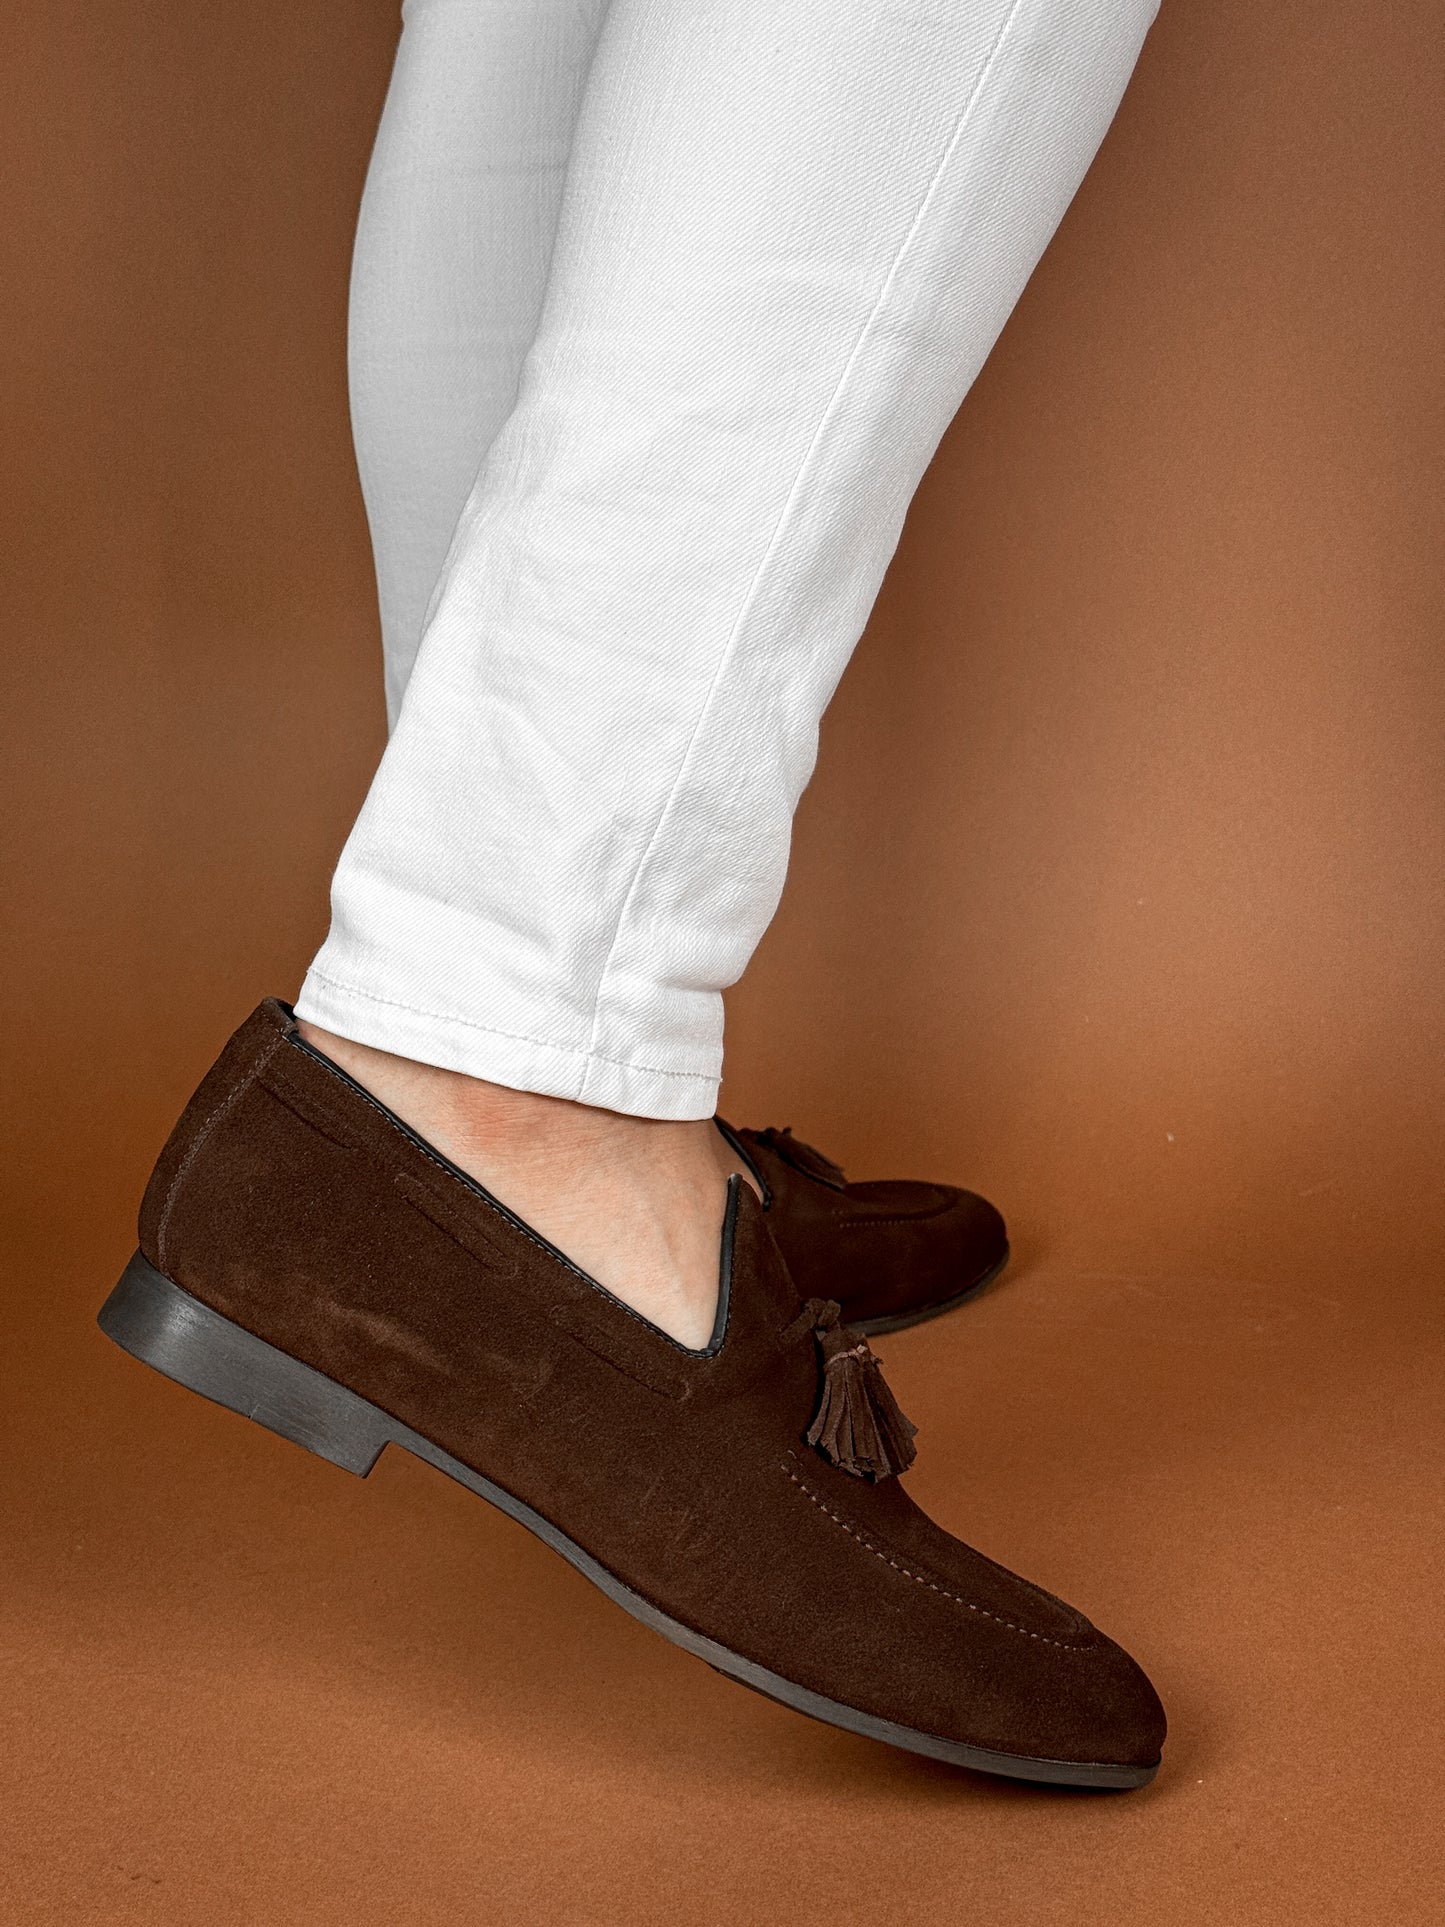 BROWN SUEDE LOAFER